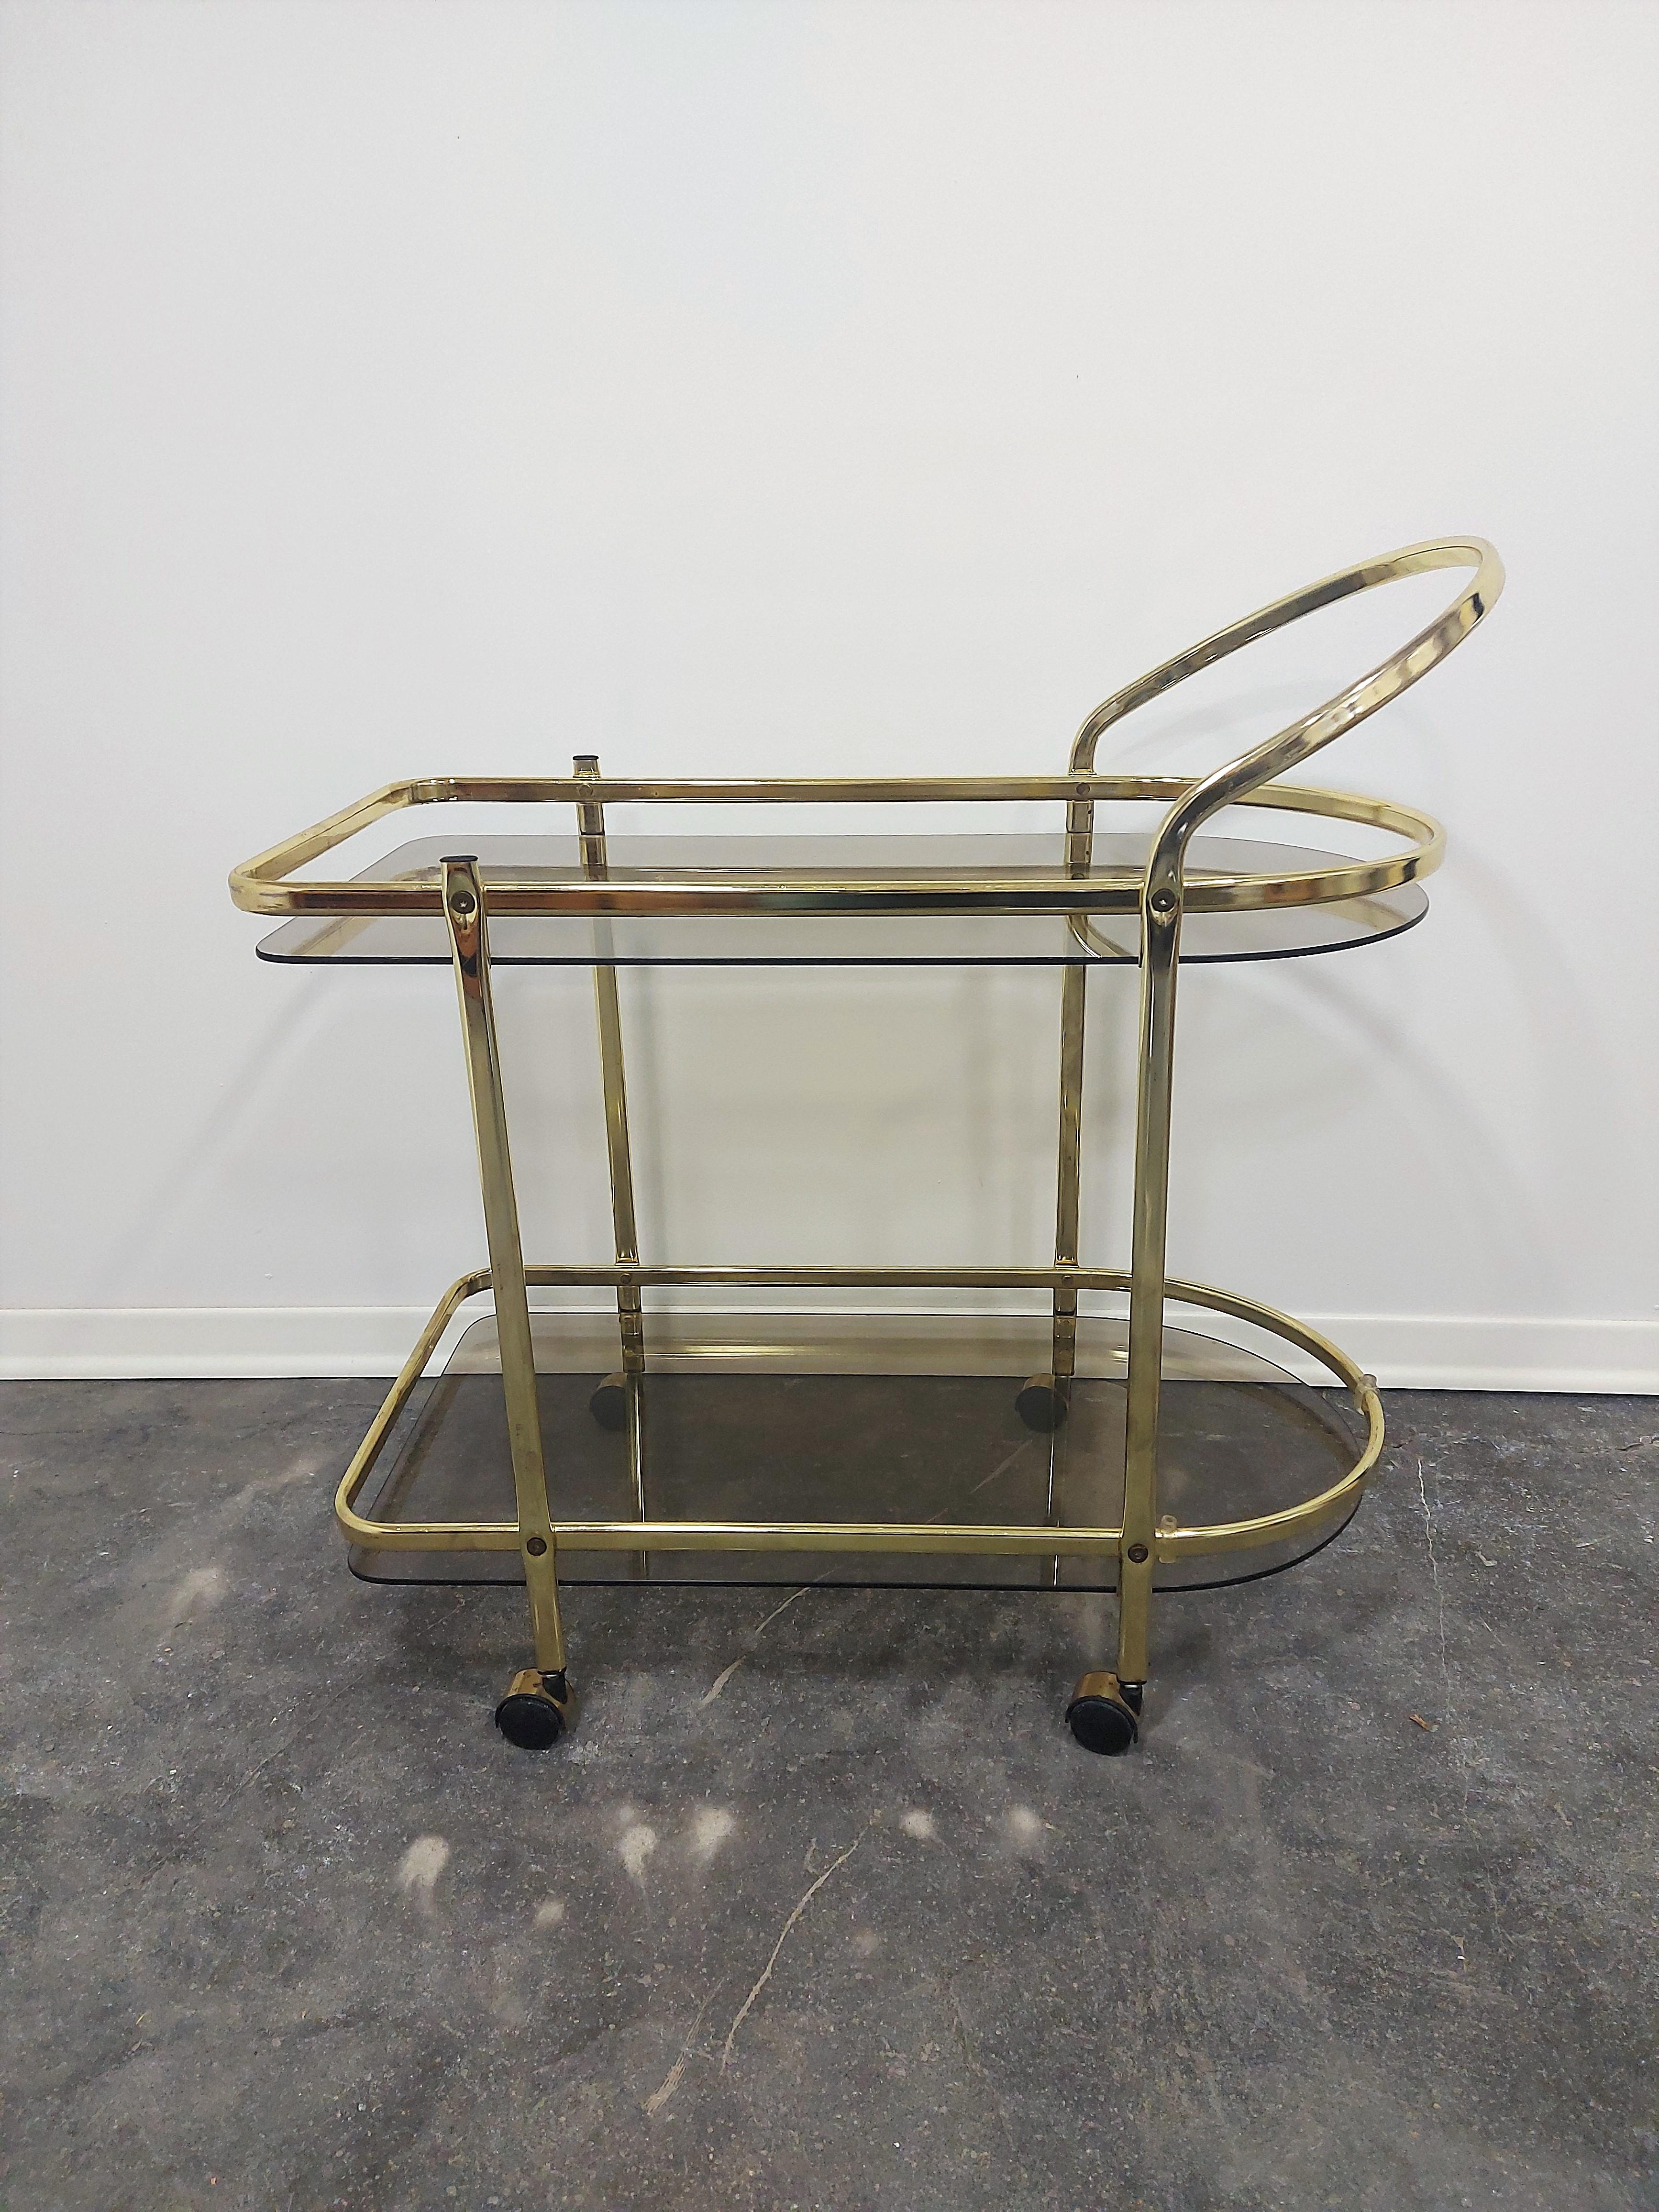 Italian Brass and Smoked glass Bar Cart, 1960s

Perfect in that upscale home with chic design. 

Two tiered for storage. 

Wheel from room to room for your convenience.

H-76,50 cm (1 tier-12,50 cm, 2 tier-55,50 cm) , W-74,50 cm, D-41 cm.